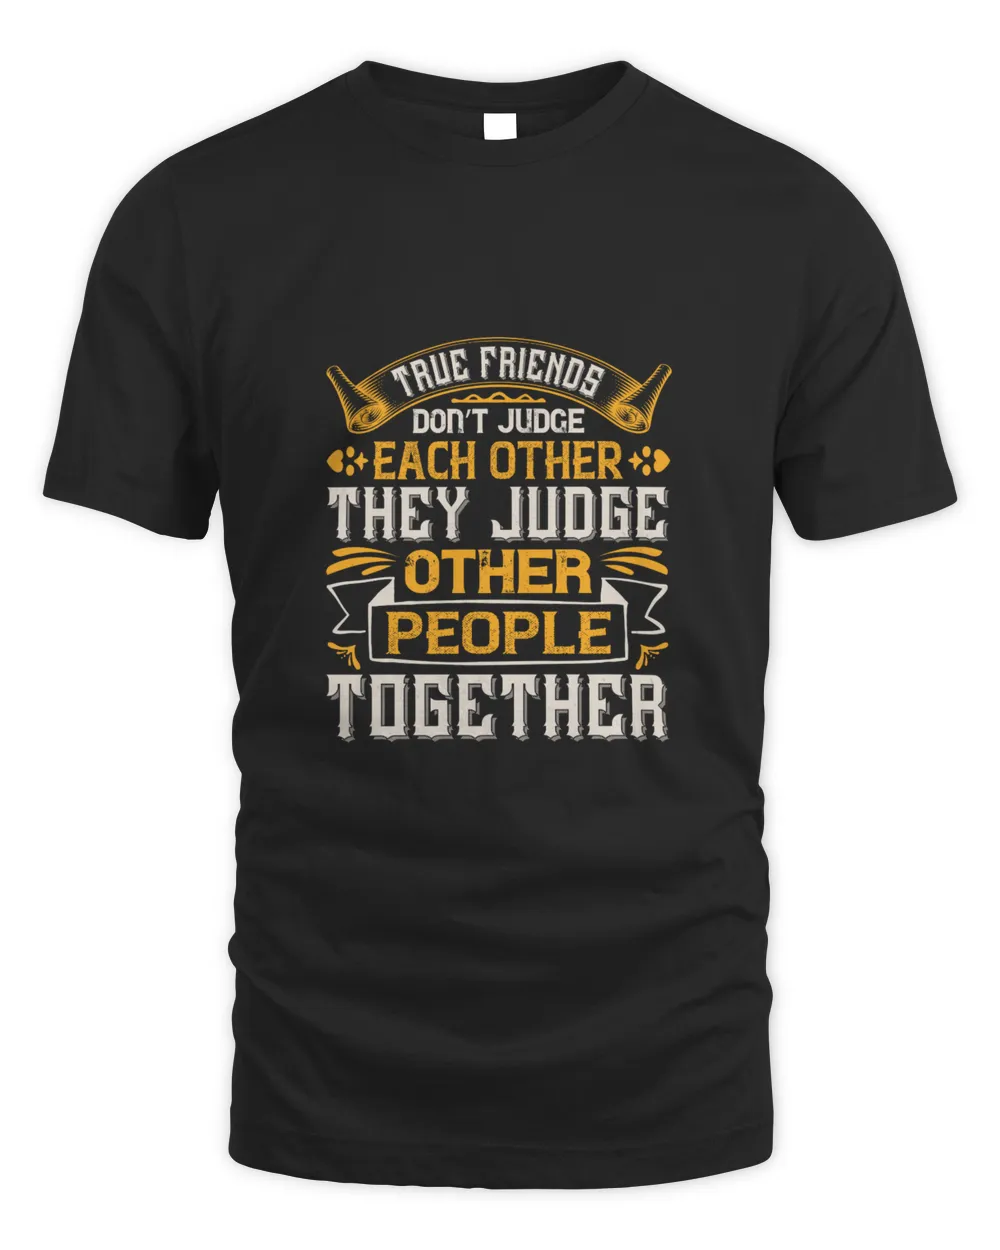 True Friends Don’t Judge Each Other, They Judge Other People TogetherBestie Shirt, Best Friend Shirt, Friendship Gift, Best Friend Birthday Gift, Friendship